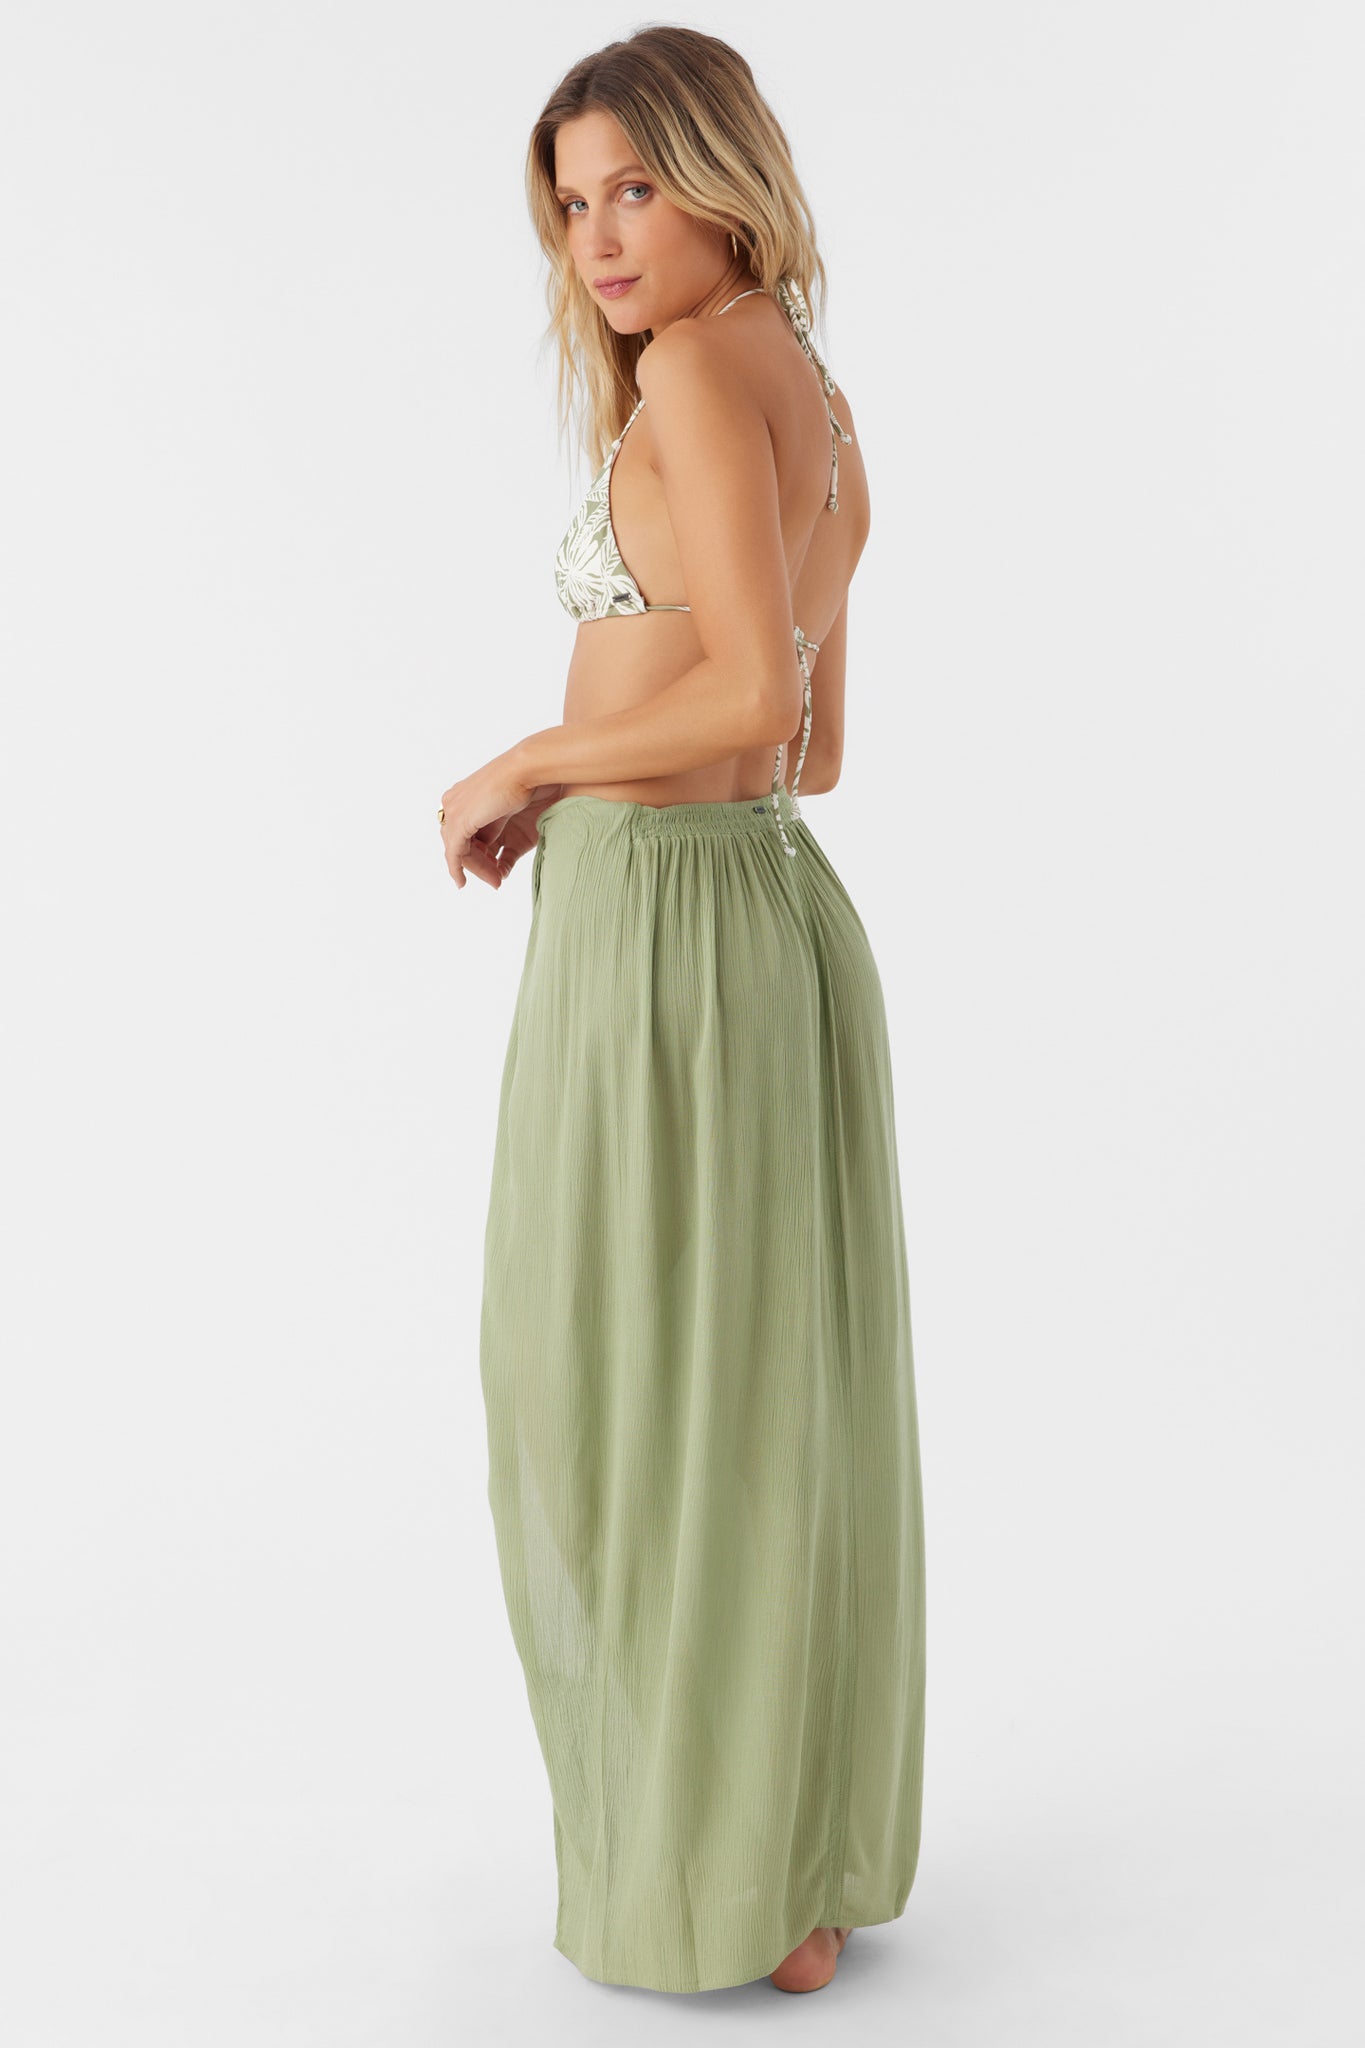 SALTWATER SOLIDS HANALEI MAXI SKIRT COVER-UP